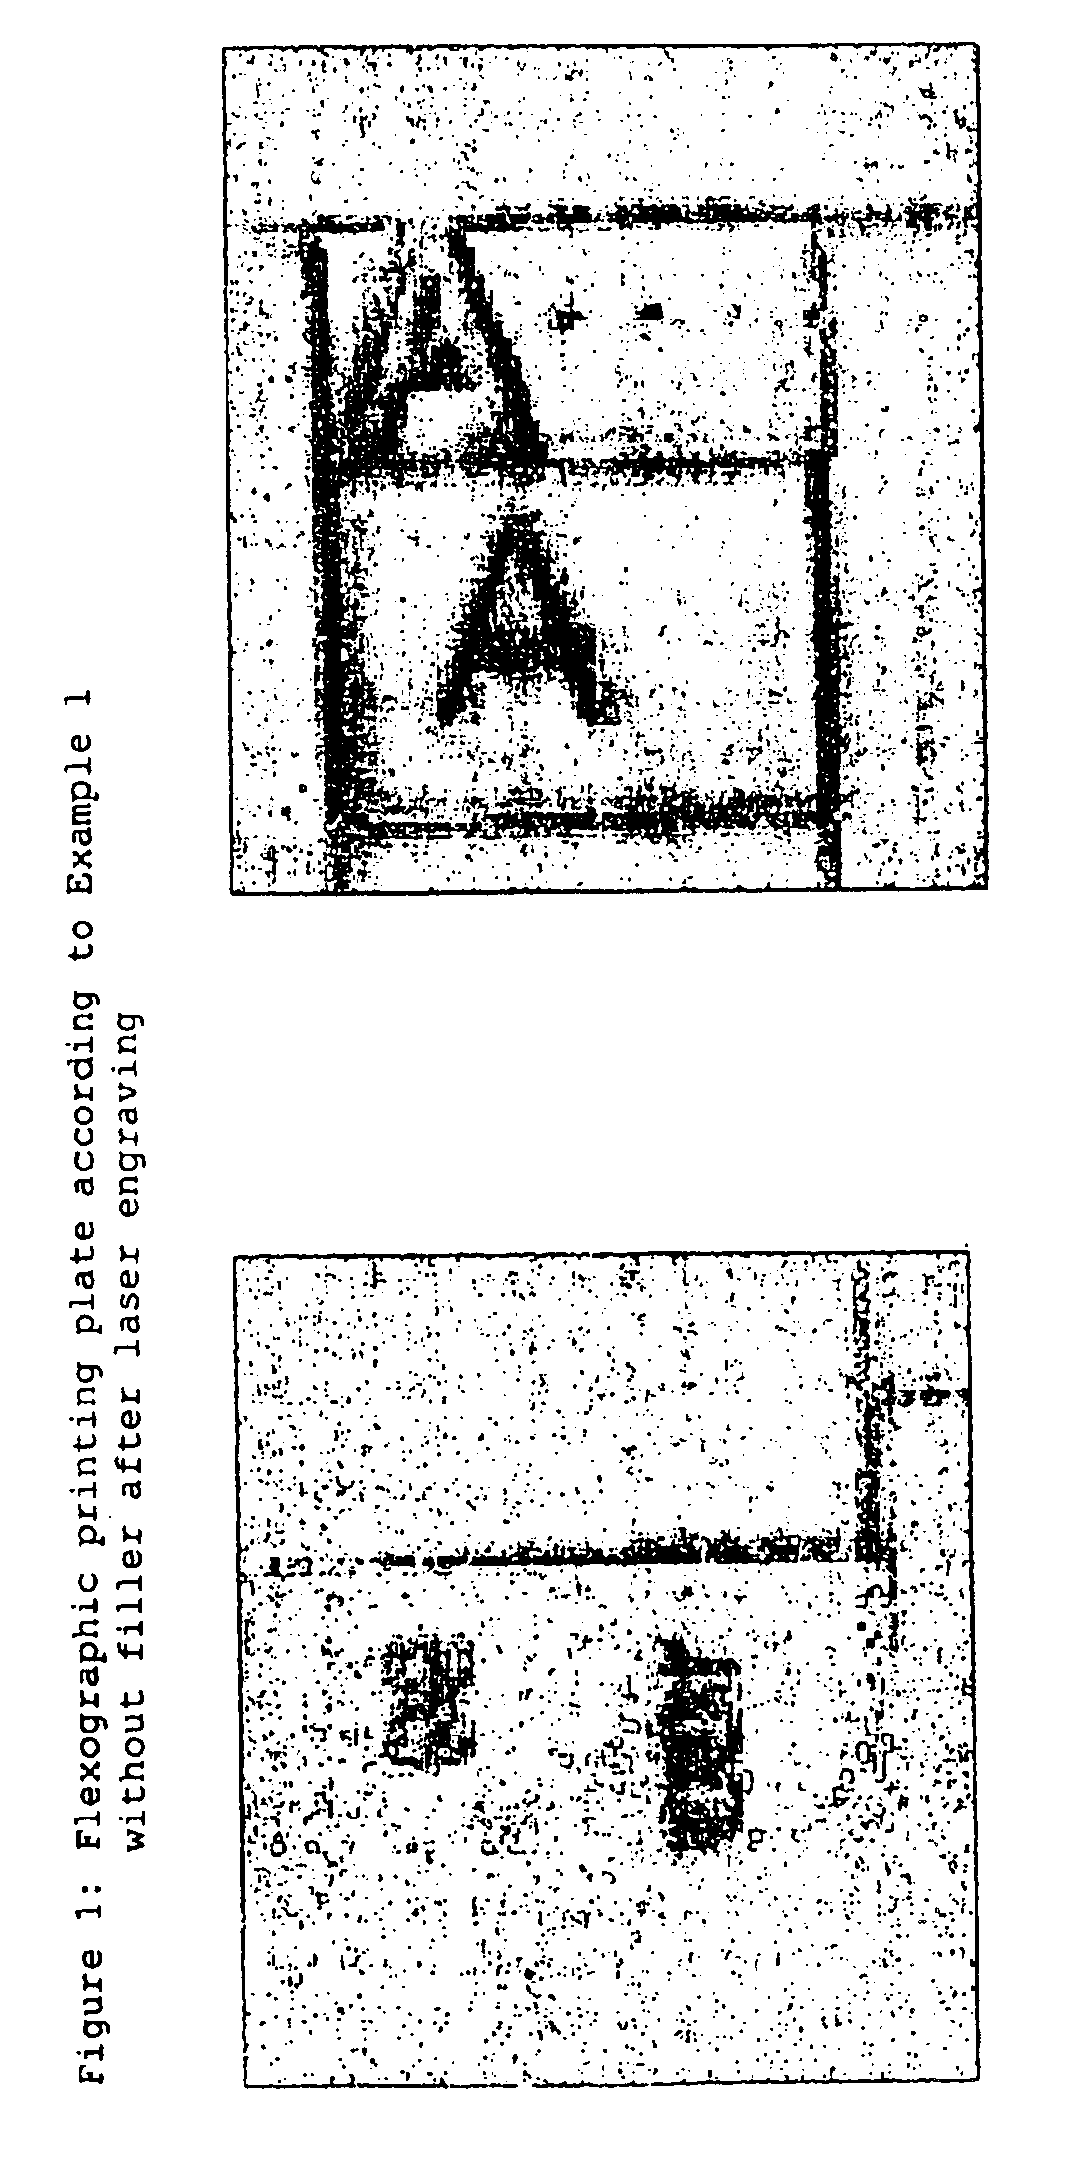 Method for producing flexographic printing plates by means of laser engraving